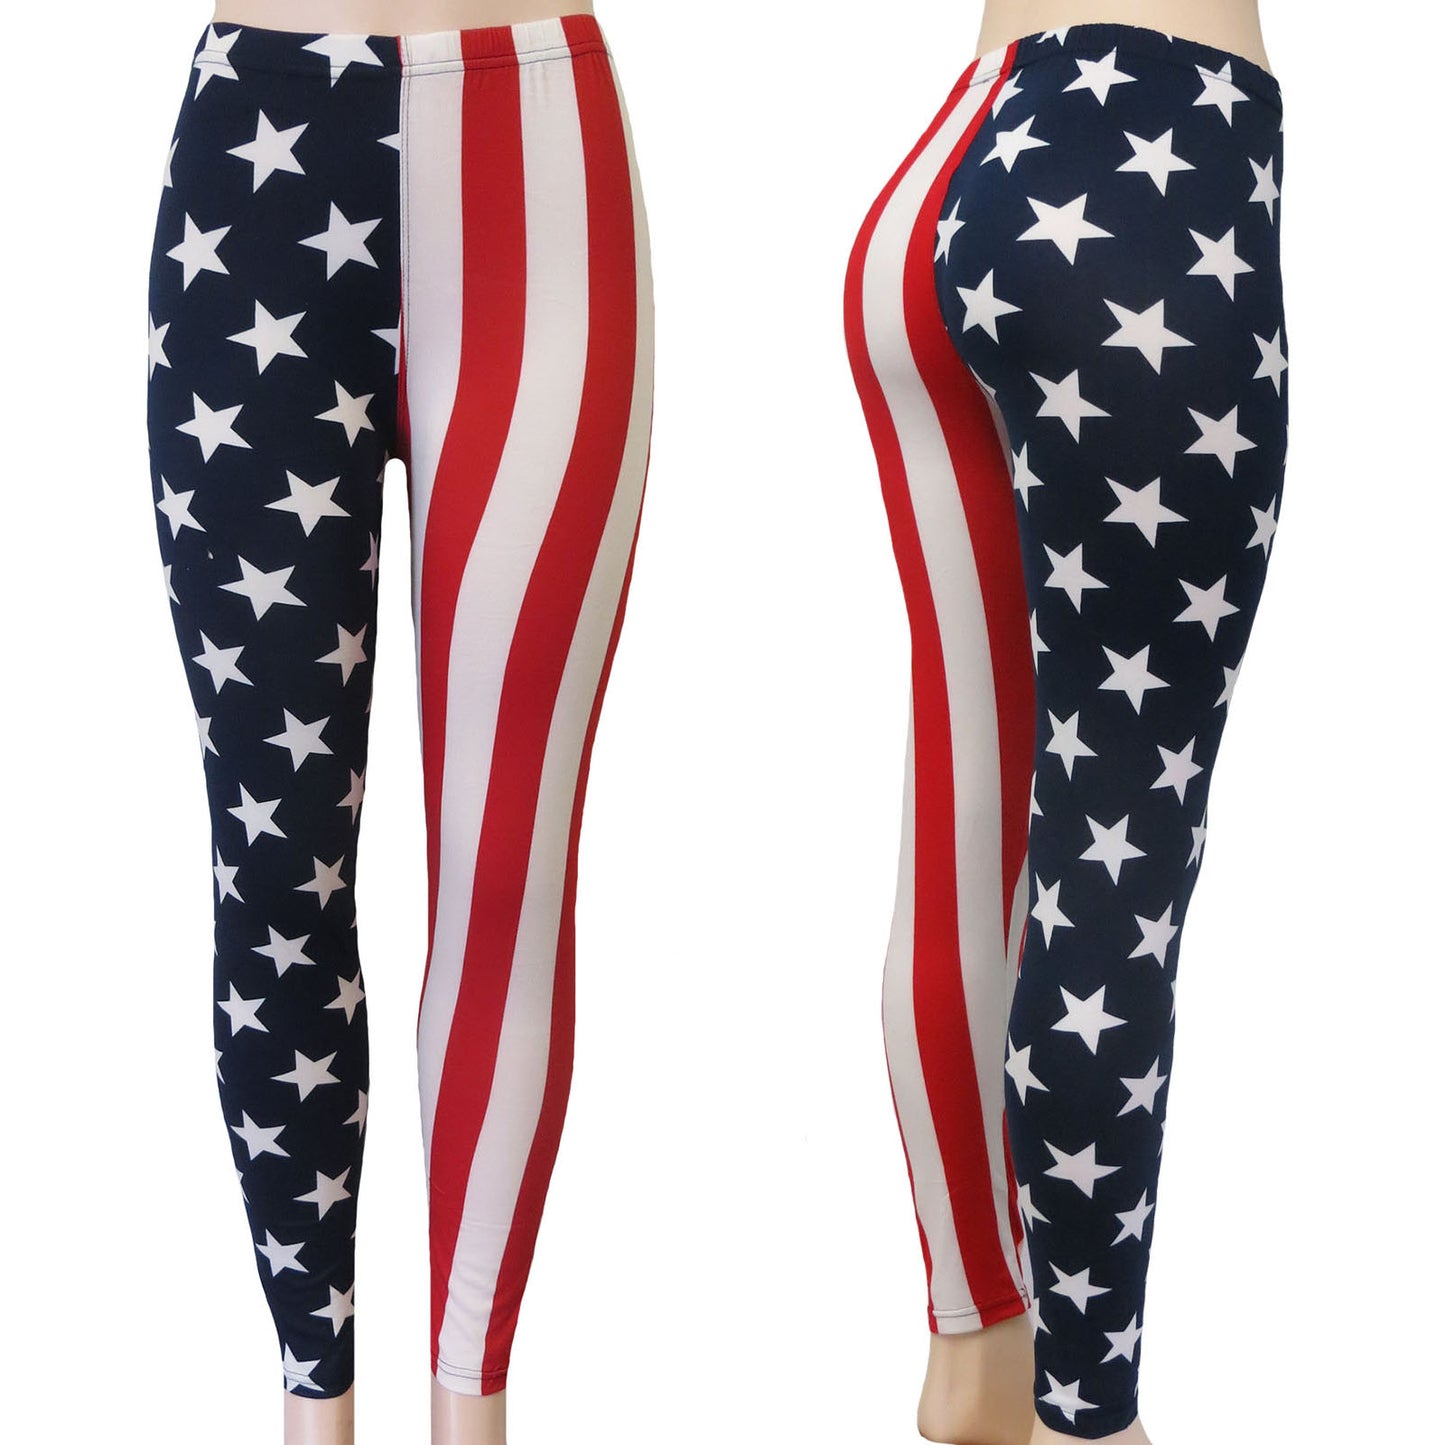 Wholesale American Flag Leggings in Red White and Blue Stars and Stripes